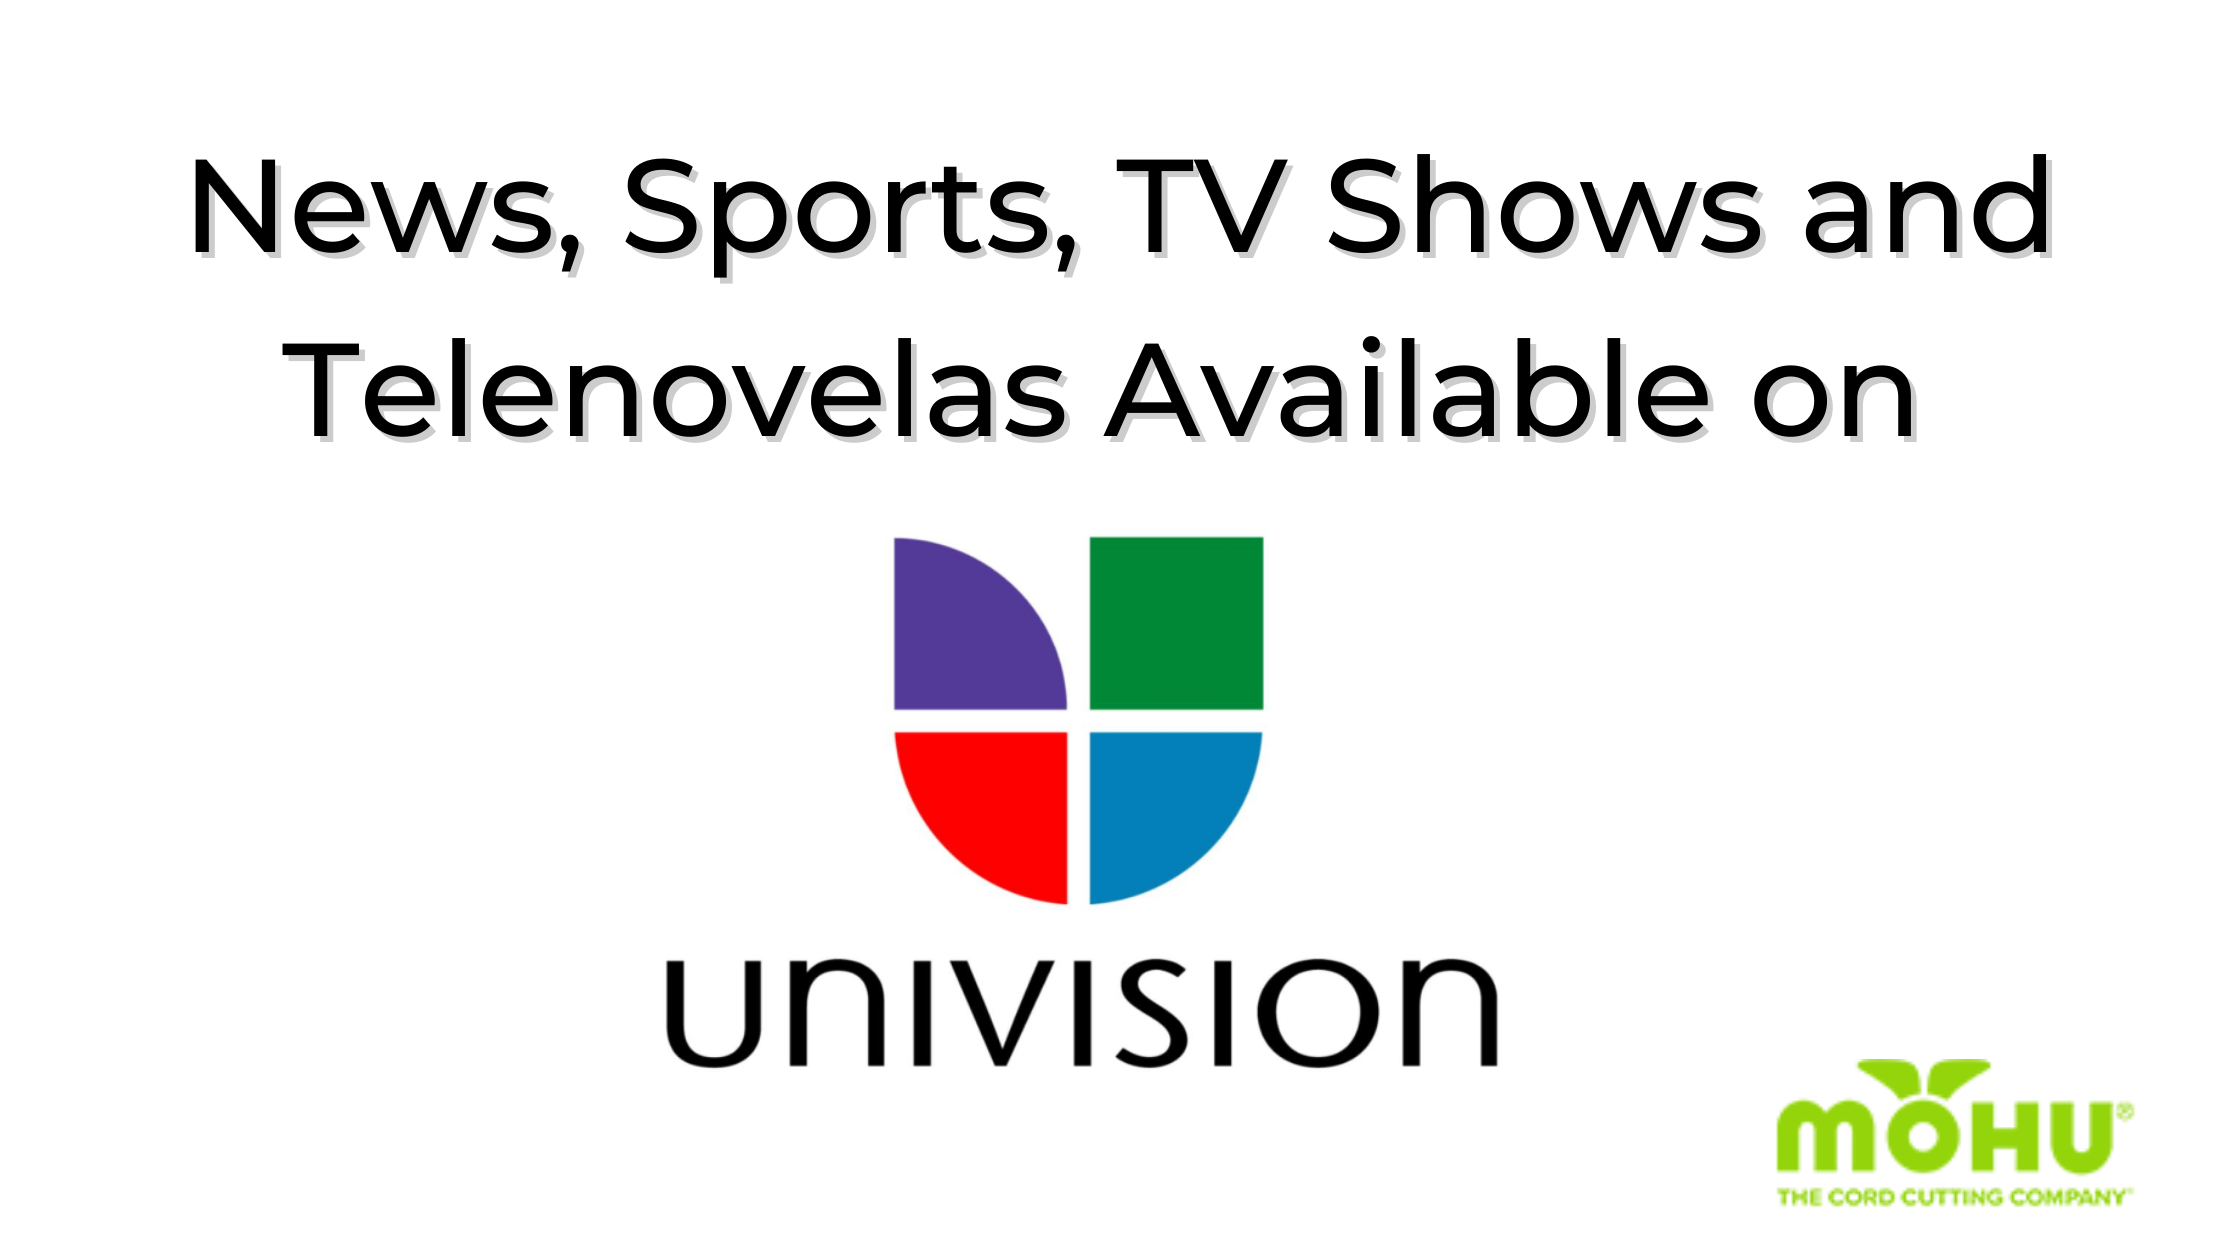 News, Sports, TV Shows and Telenovelas Available on Univision